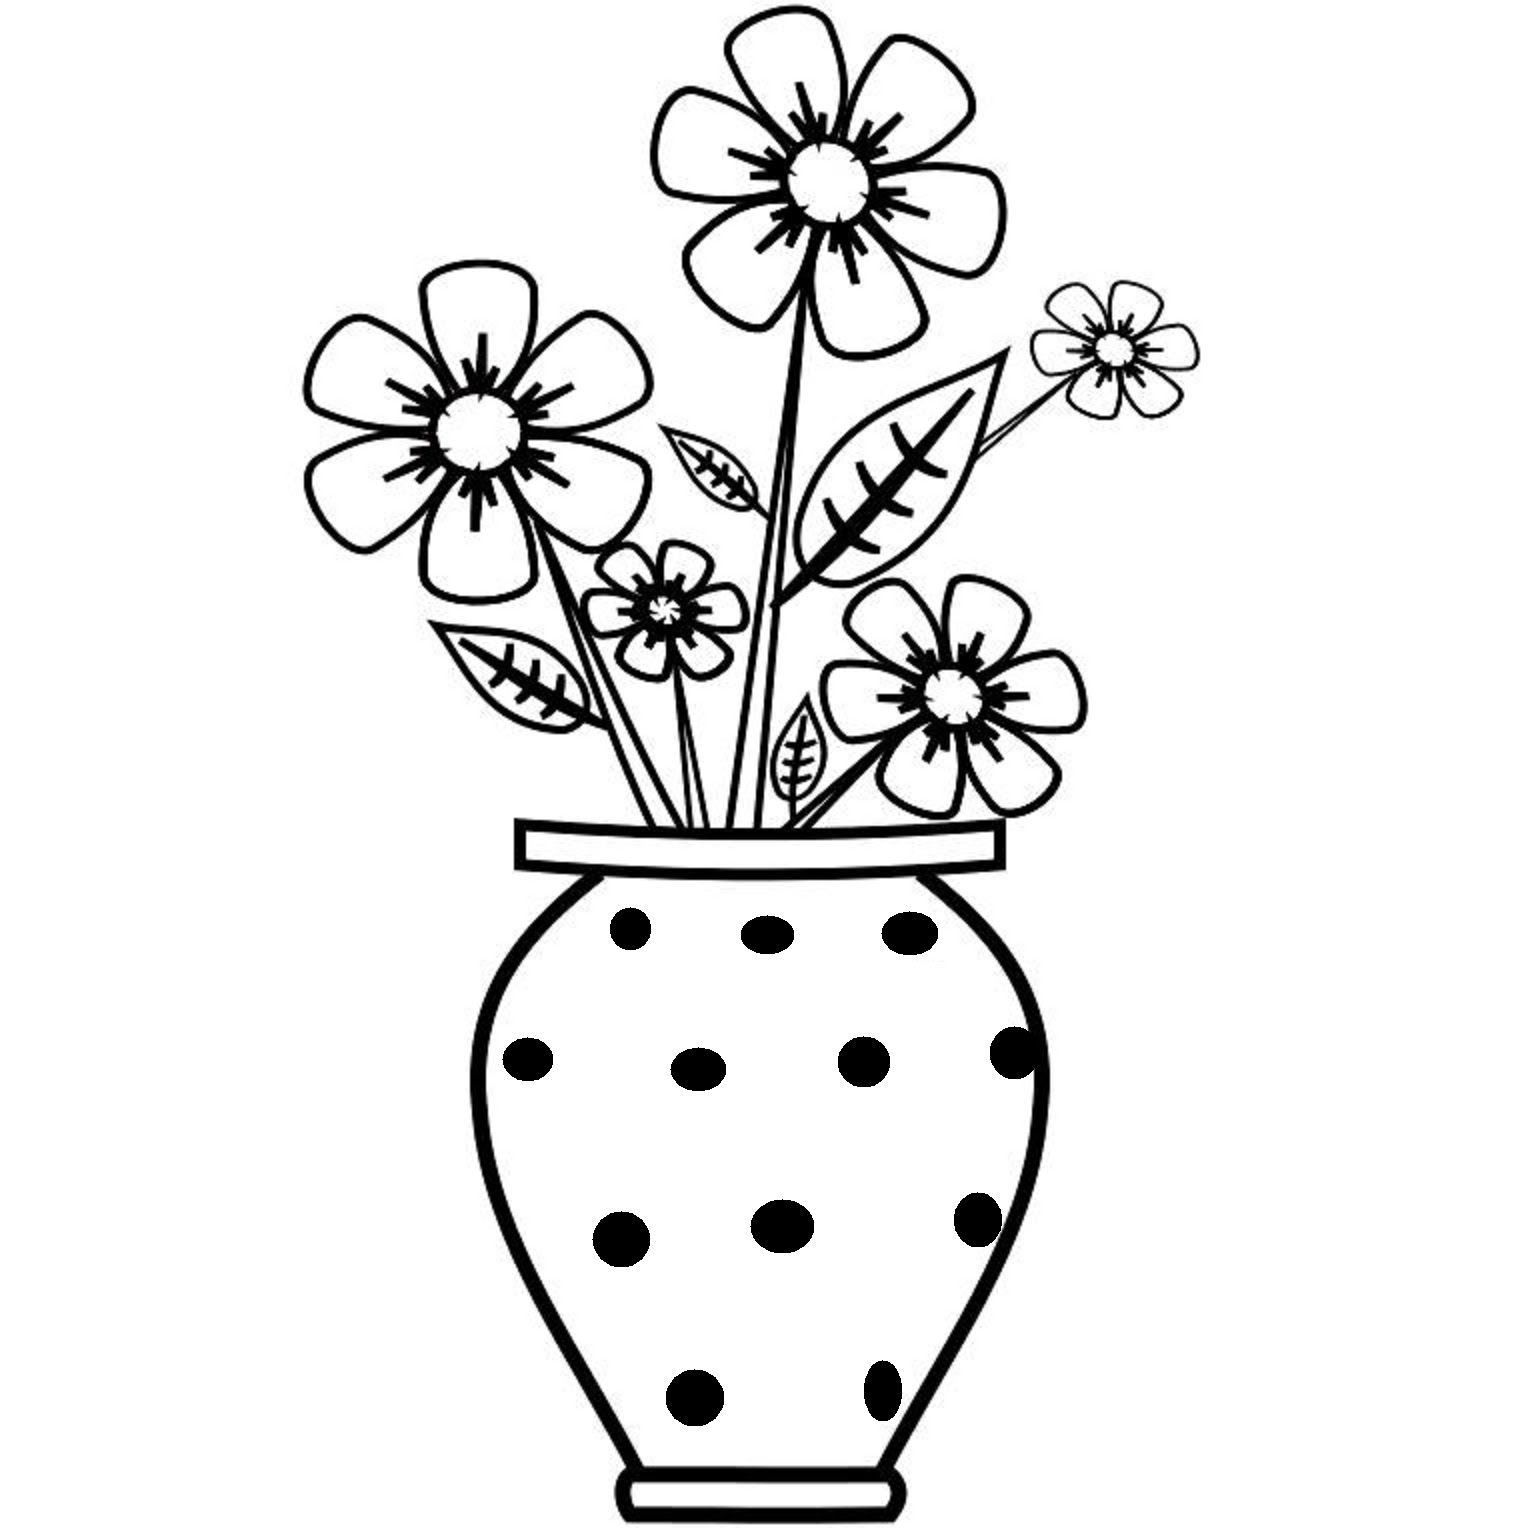 Bouquet of flowers drawing png is about is about flower, vase, cut flowers, floral design, watercolor painting. The Best Free Vase Drawing Images Download From 1549 Free Drawings Of Vase At Getdrawings